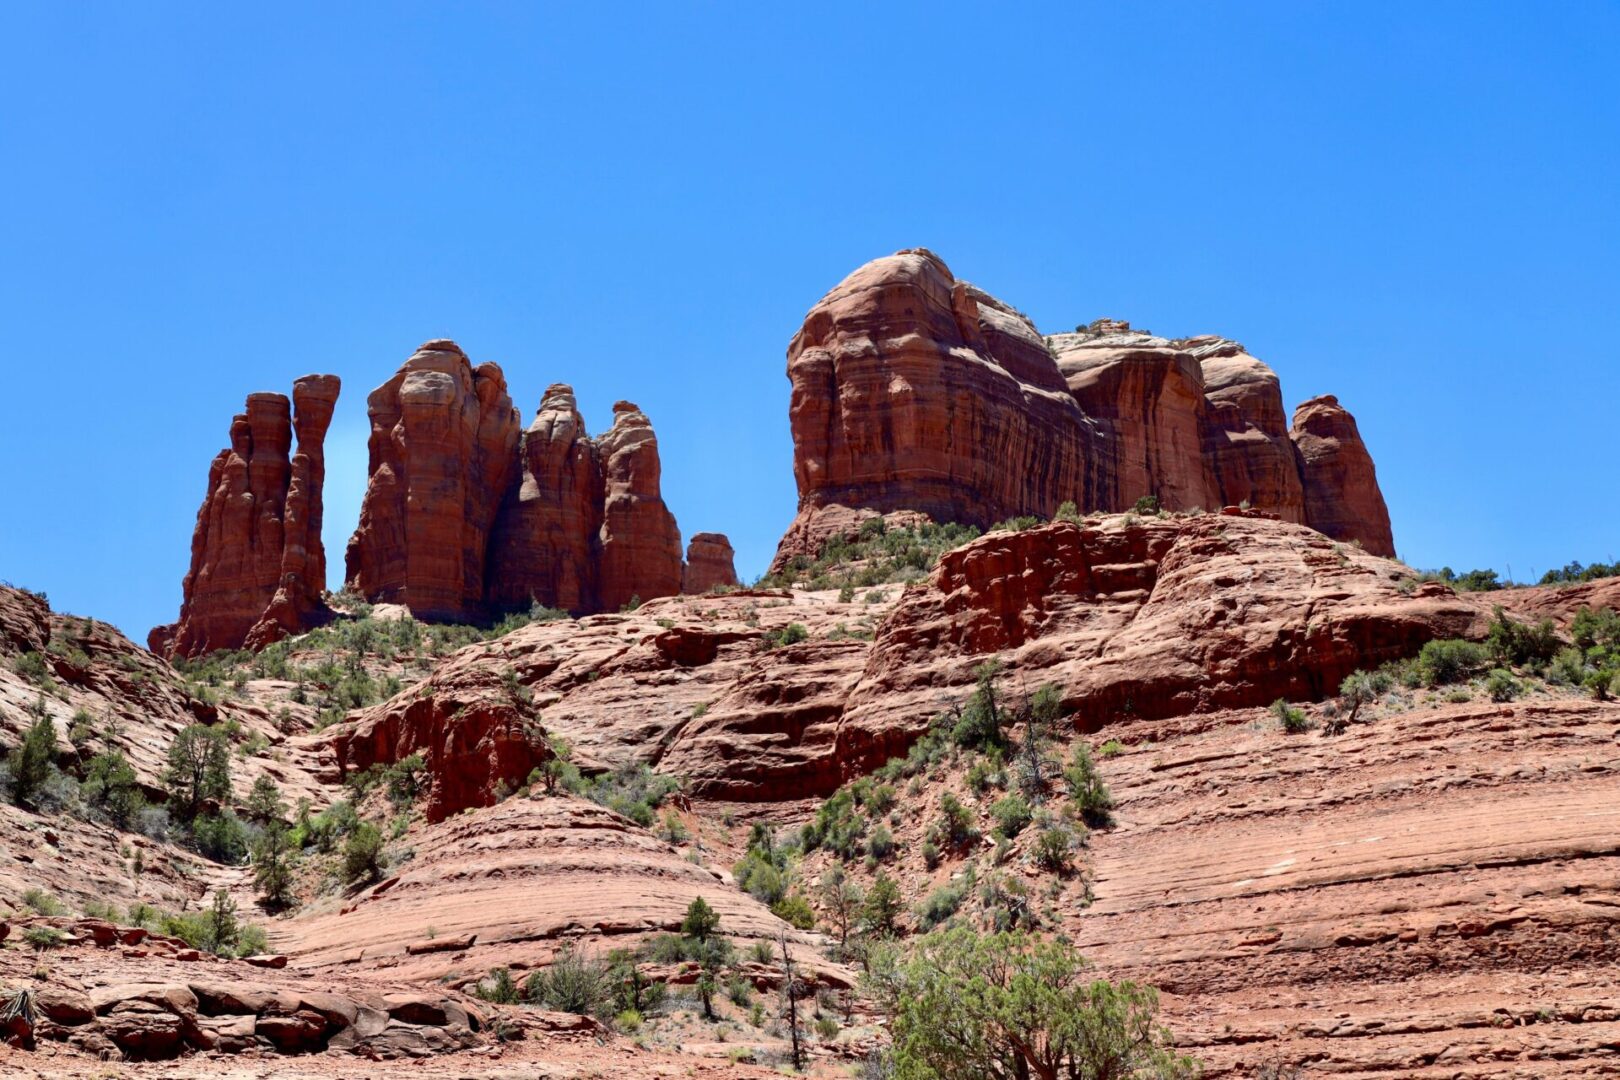 The ancient Cathedral rock sculptures